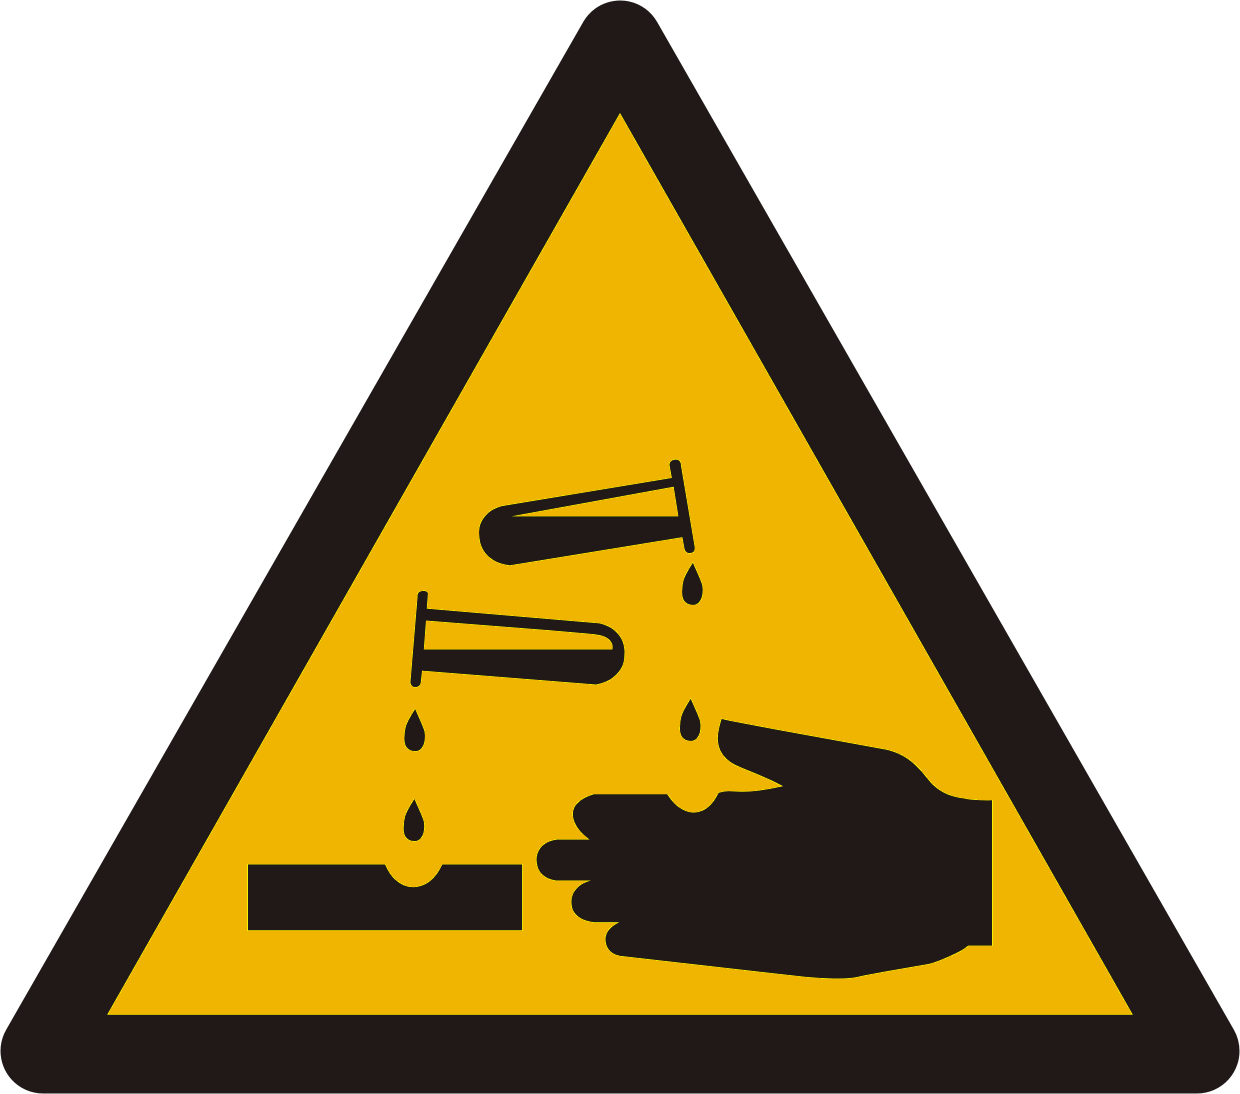 corrosive warning signs - get domain pictures - getdomainvids.com